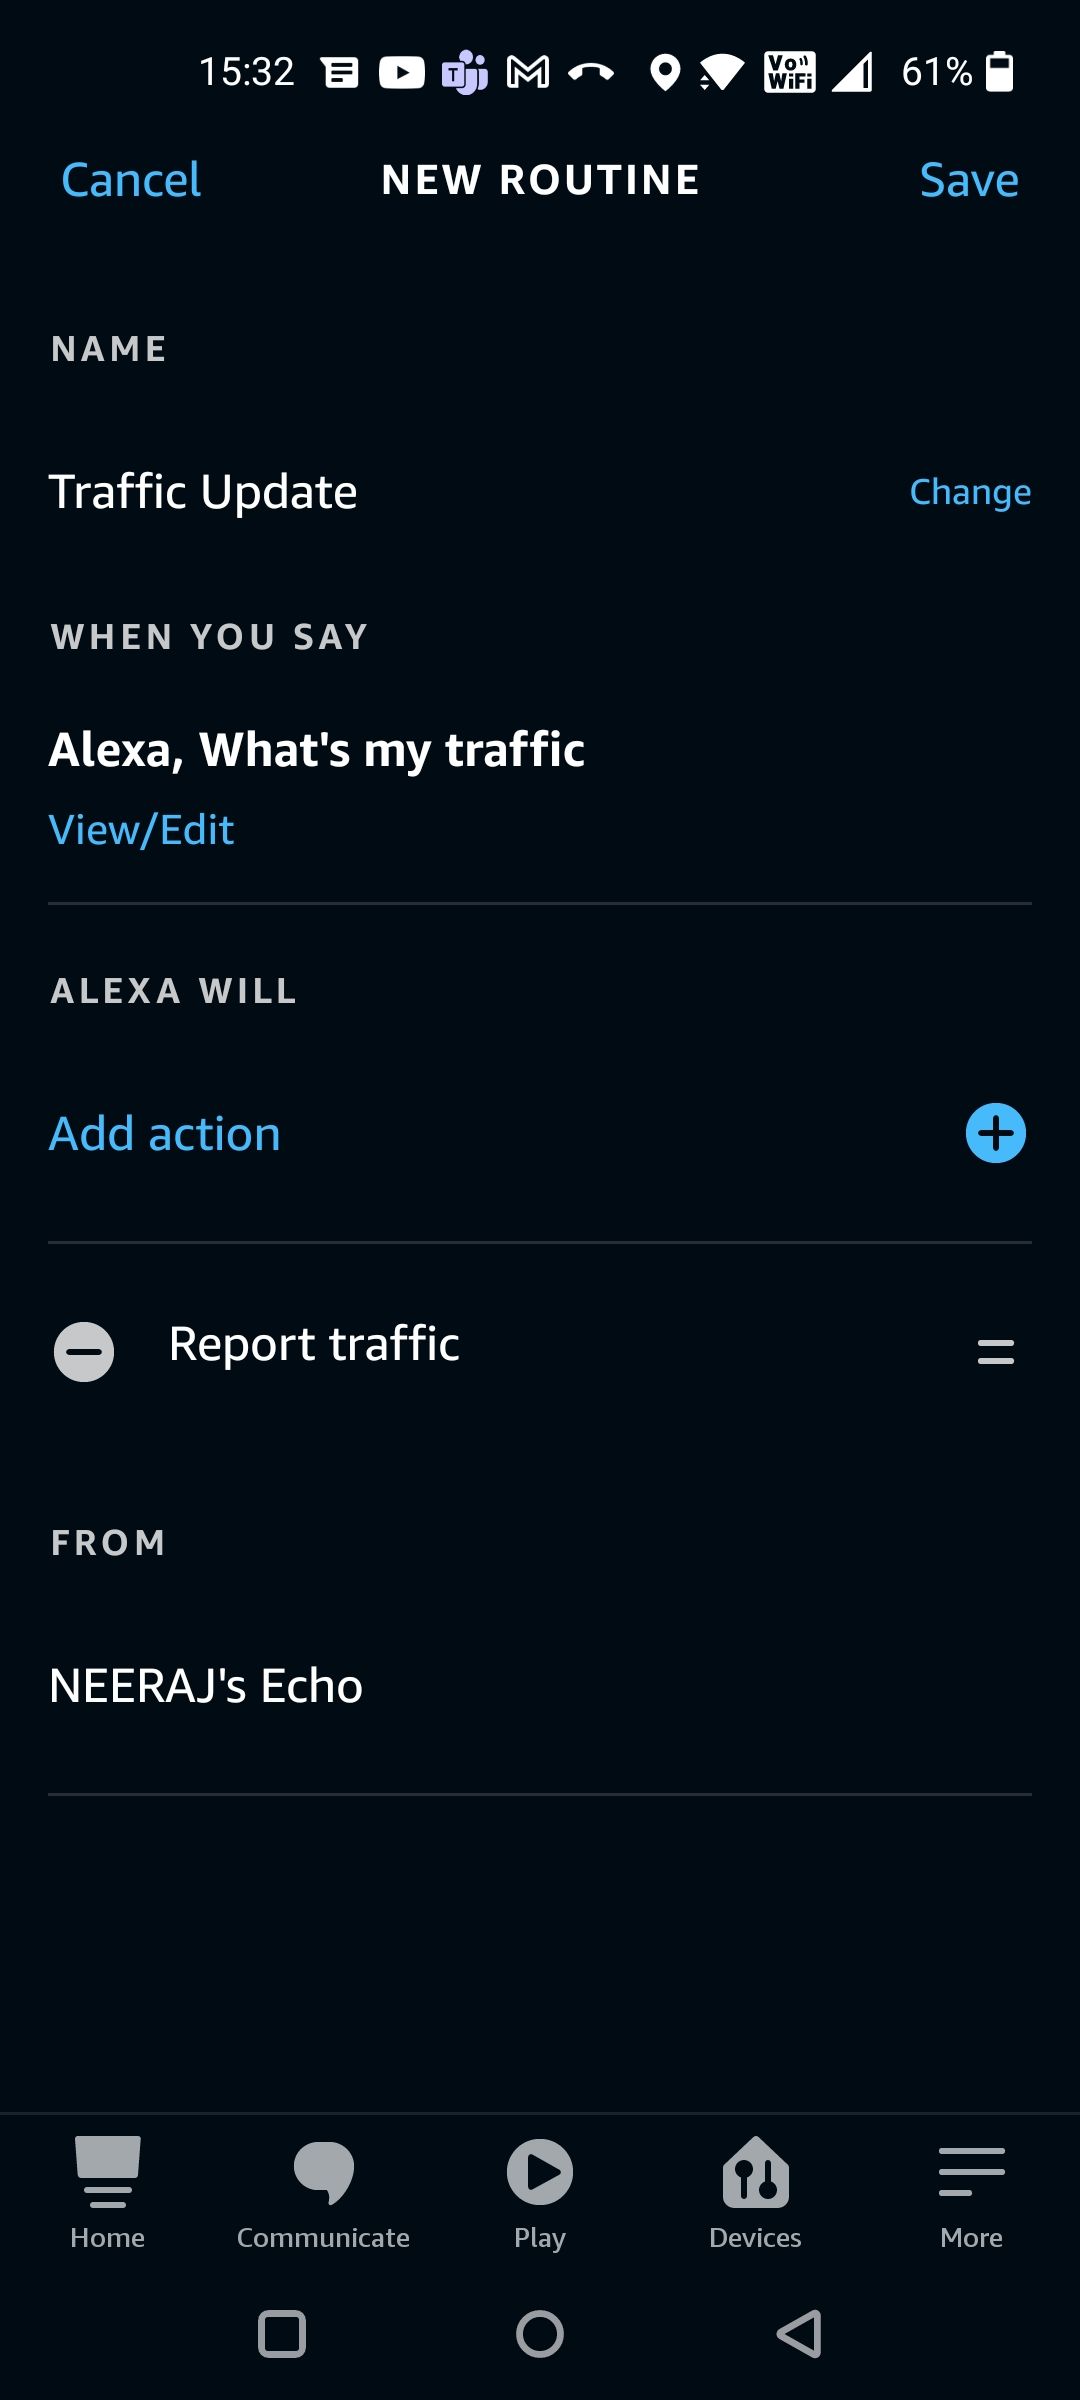 Save and Enable Traffic Update Routine